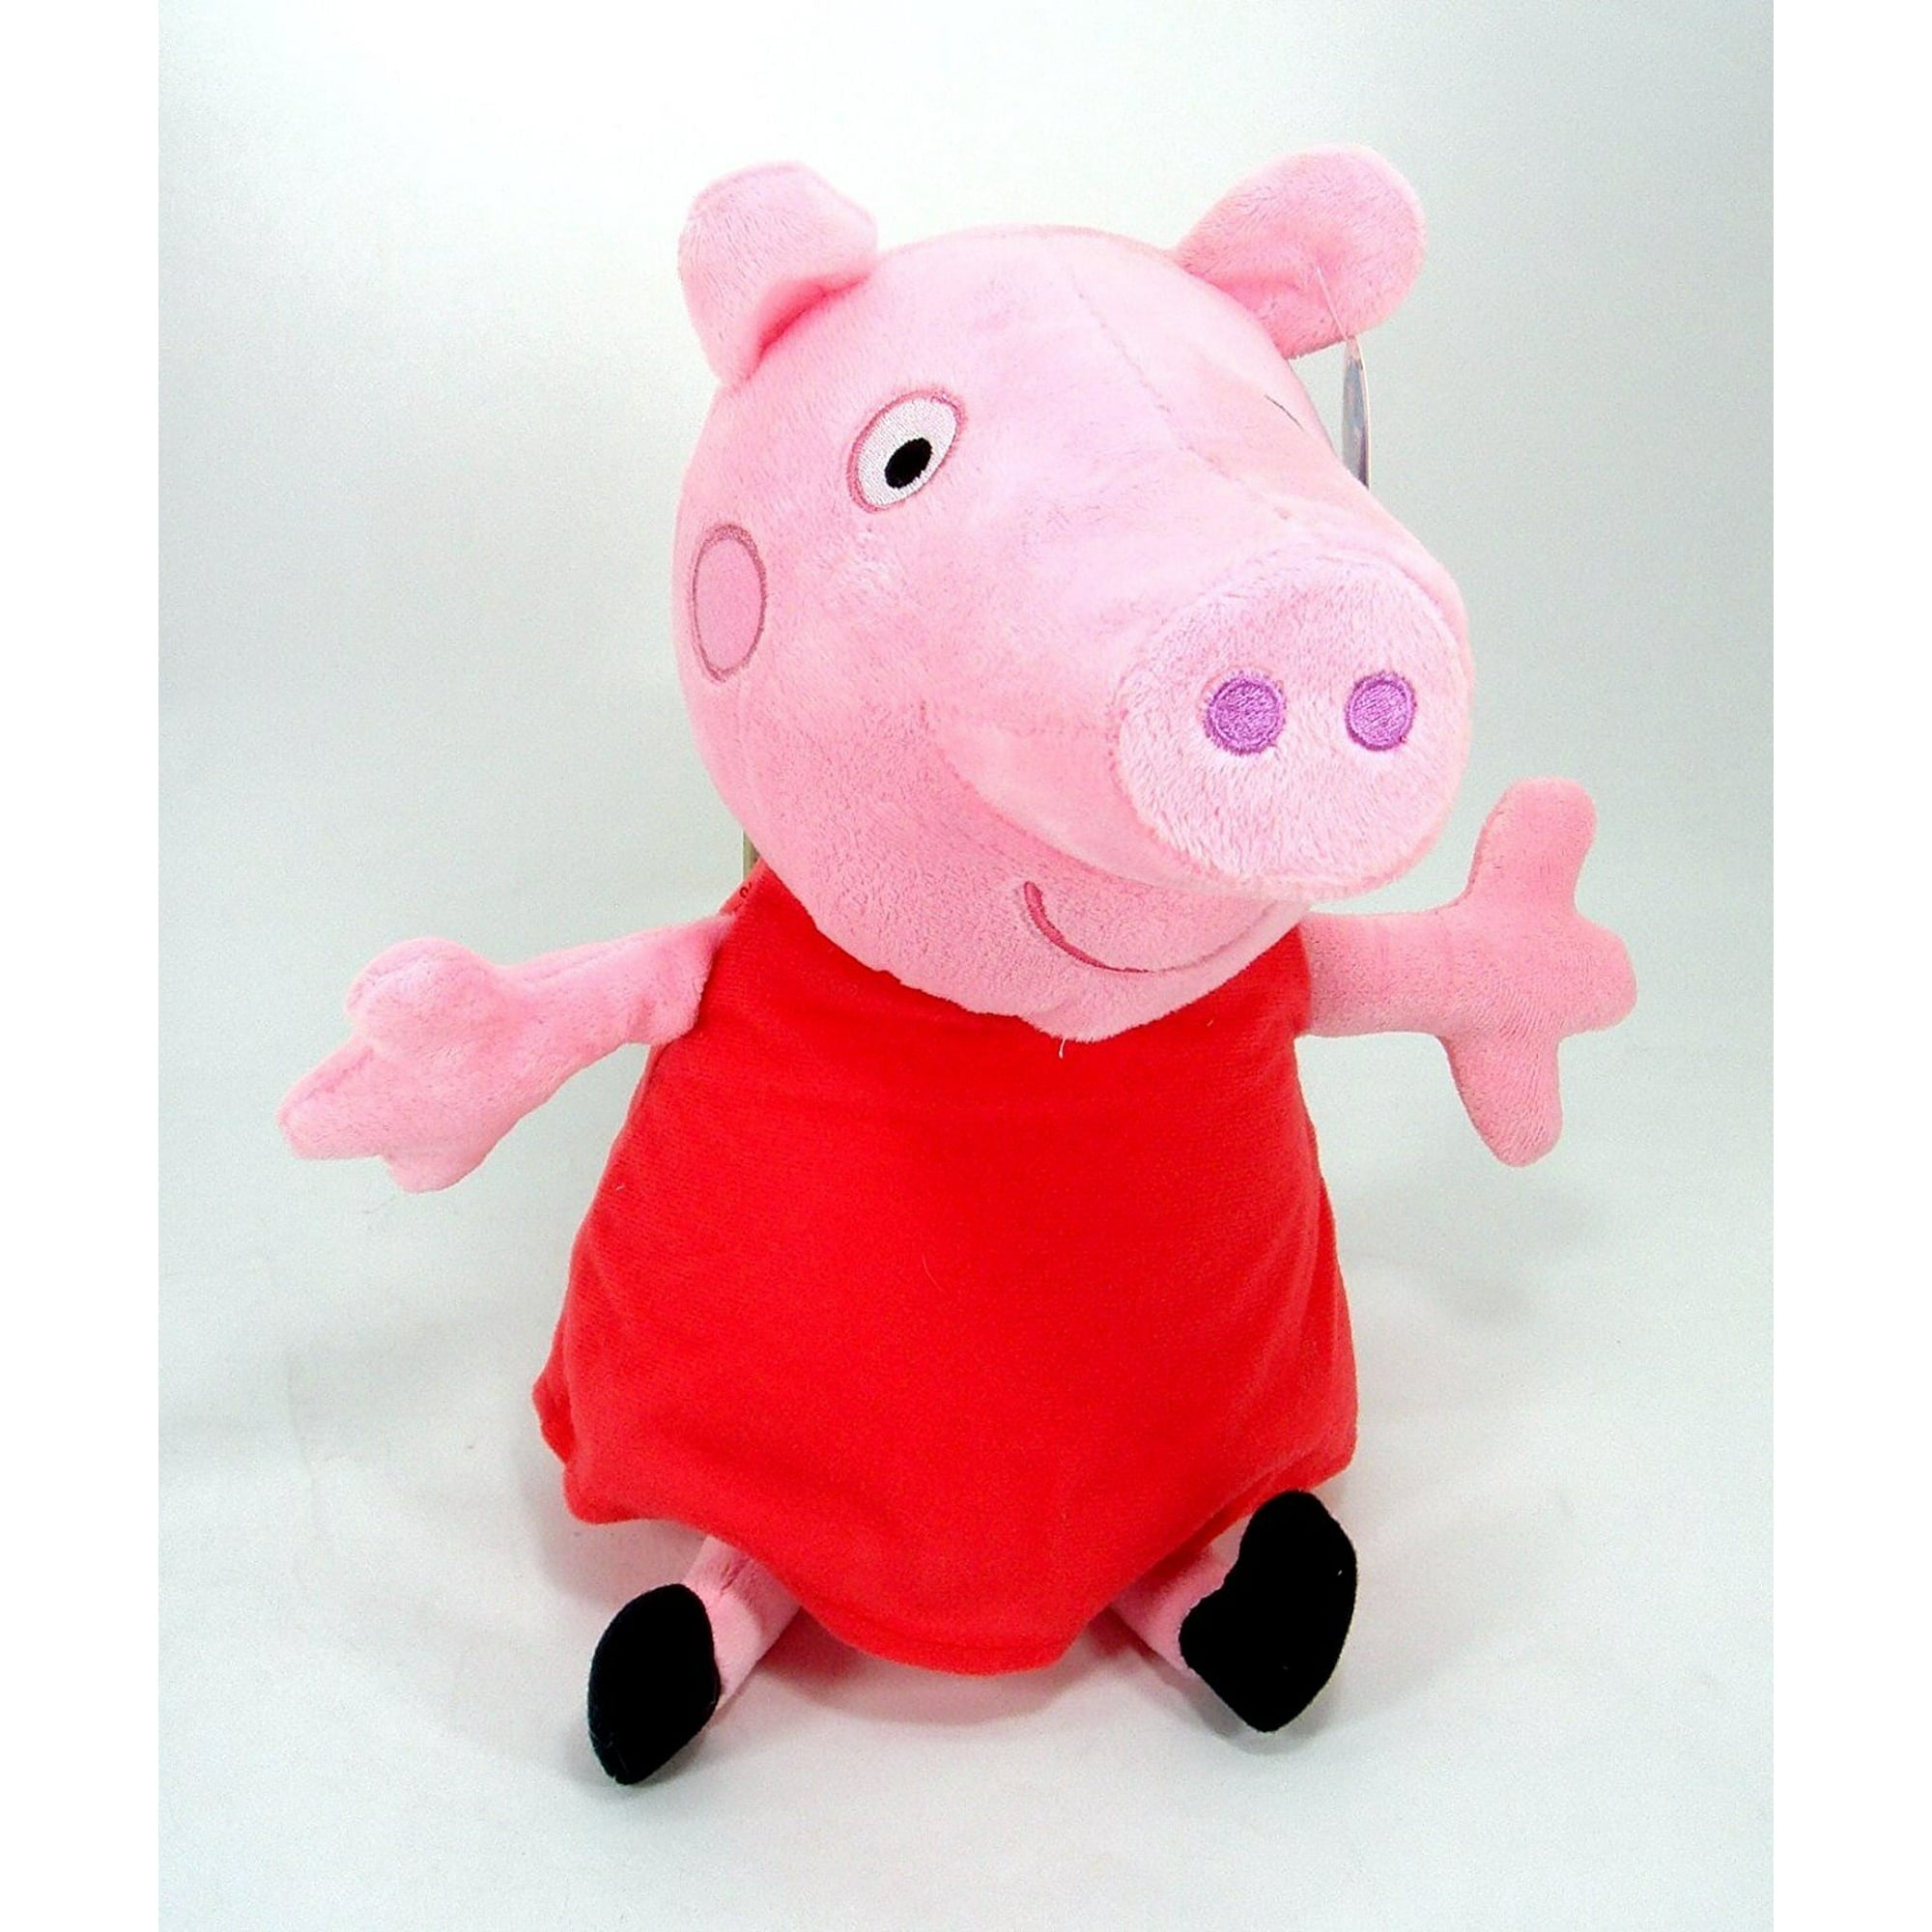 Peppa Pig Small Children's Plush Toy (6in) - Peppa (Red Dress)